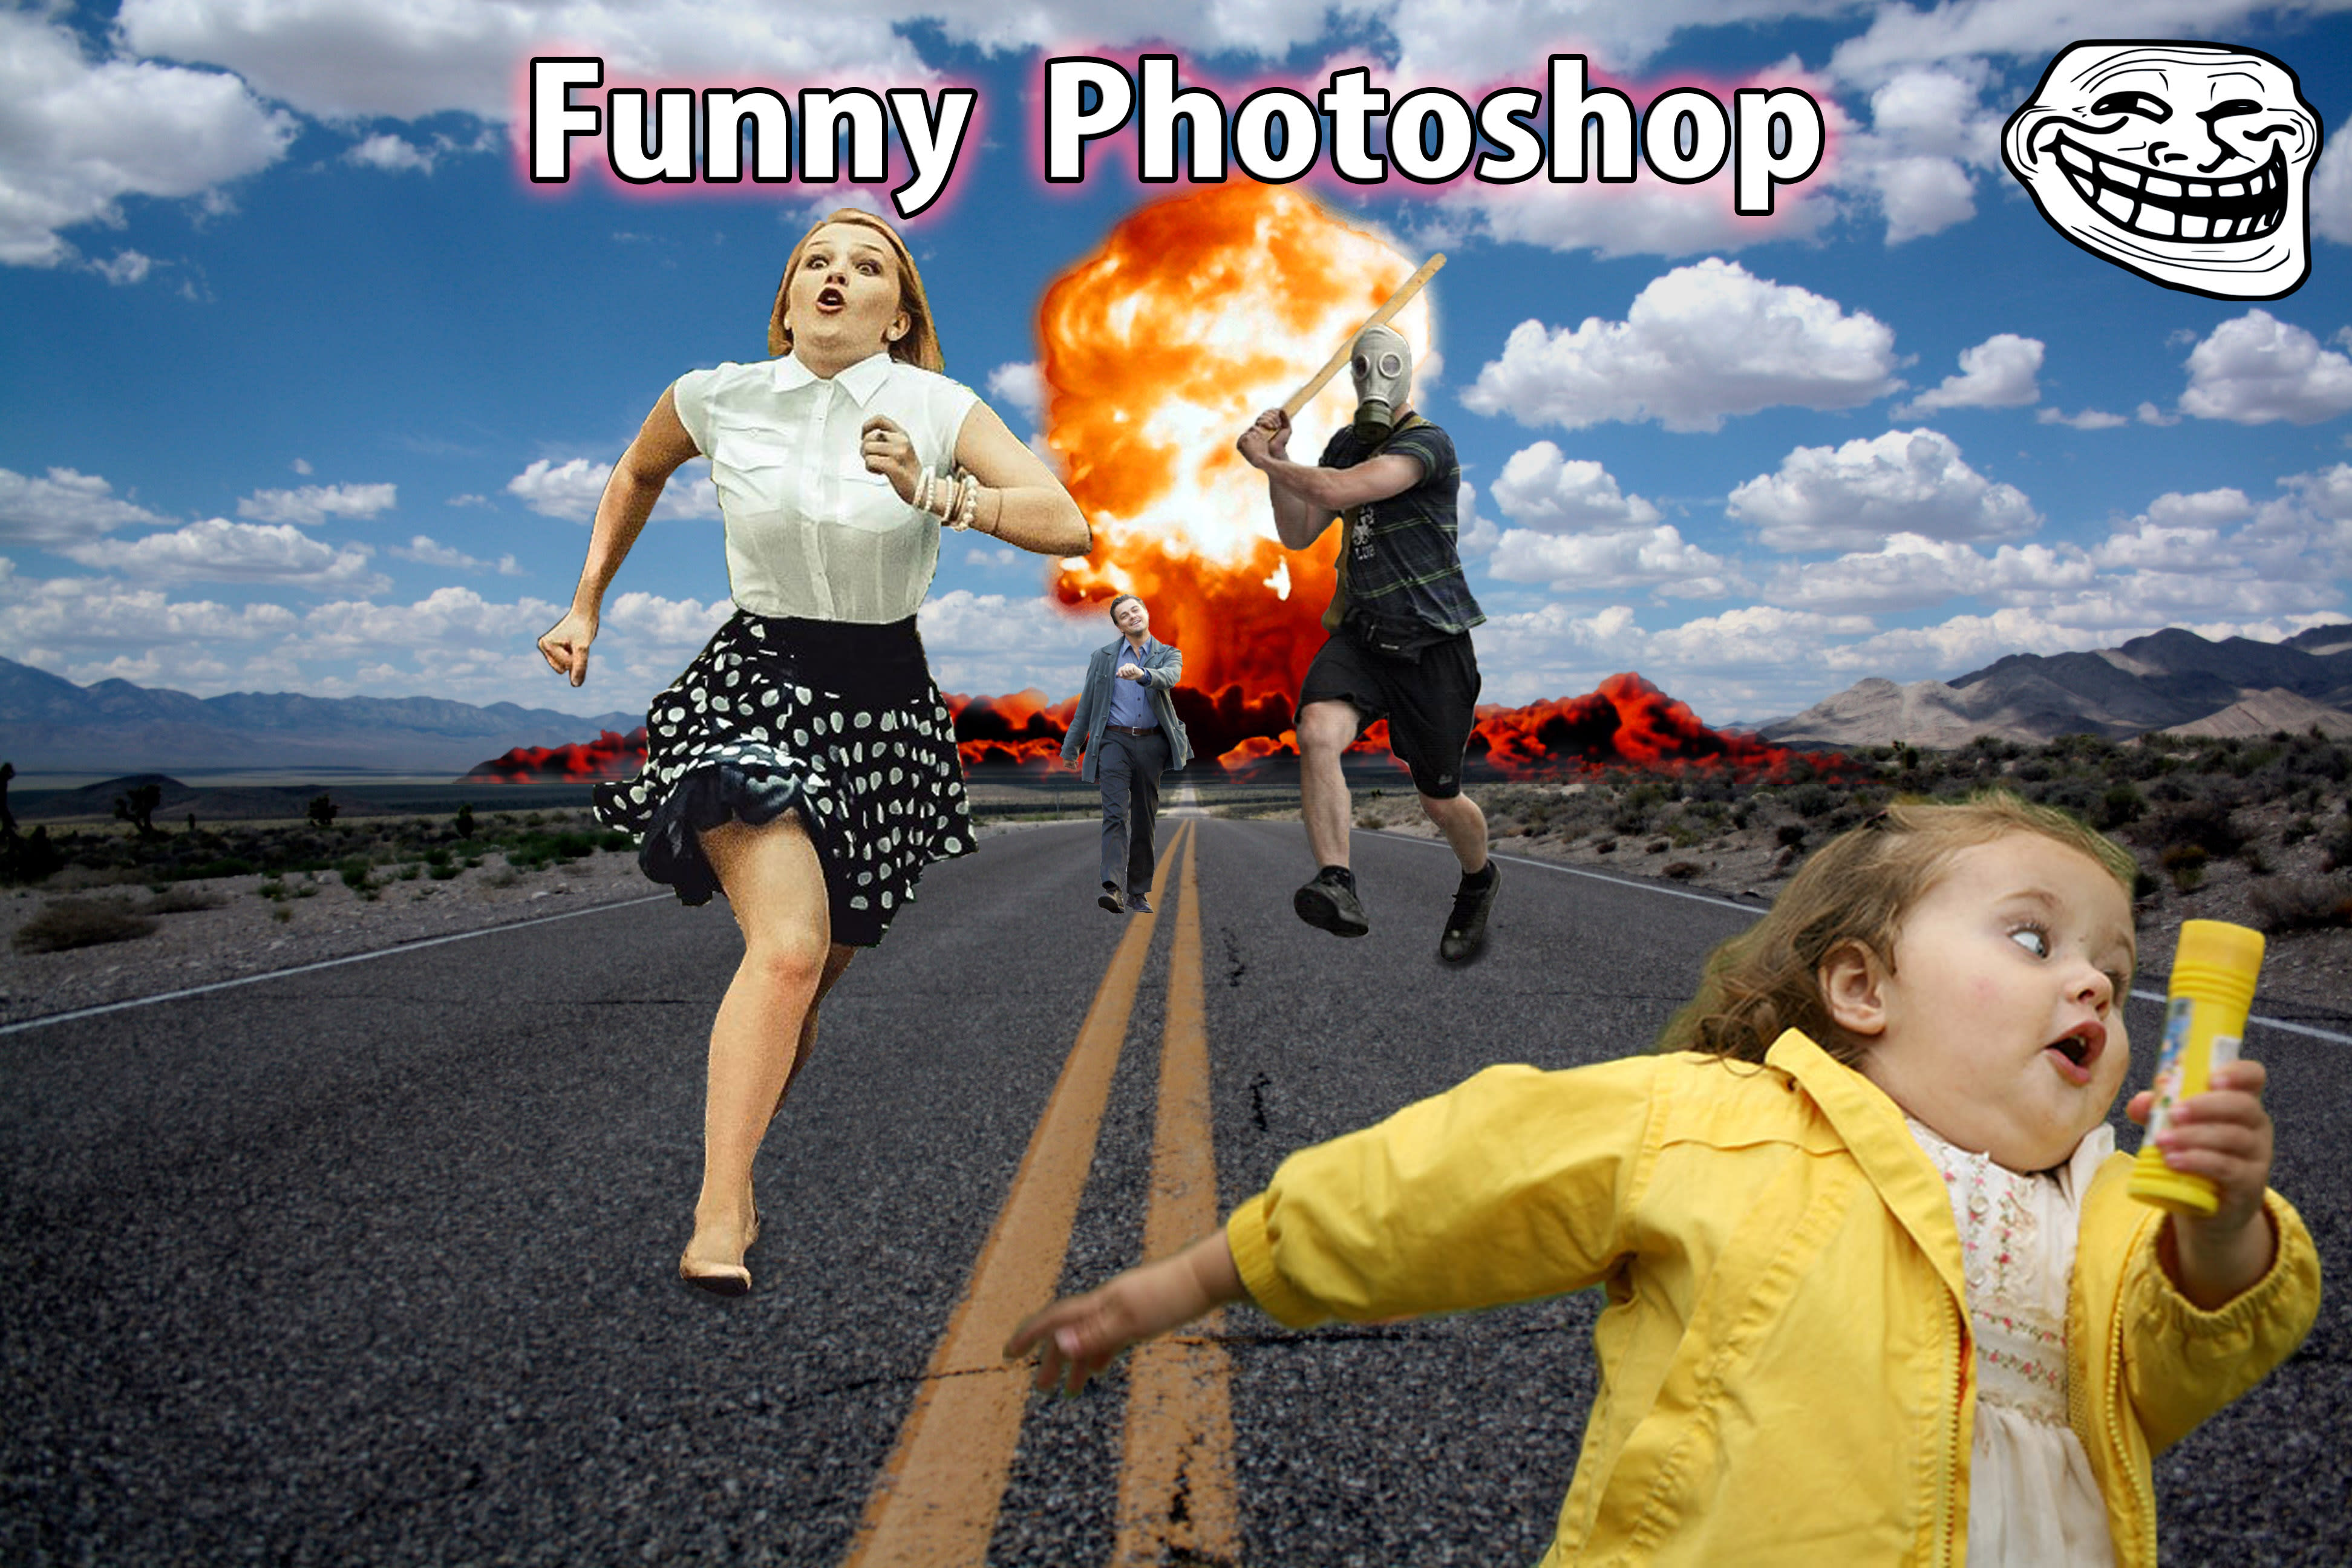 Do funny photoshop editing for your image by Skytone5 | Fiverr